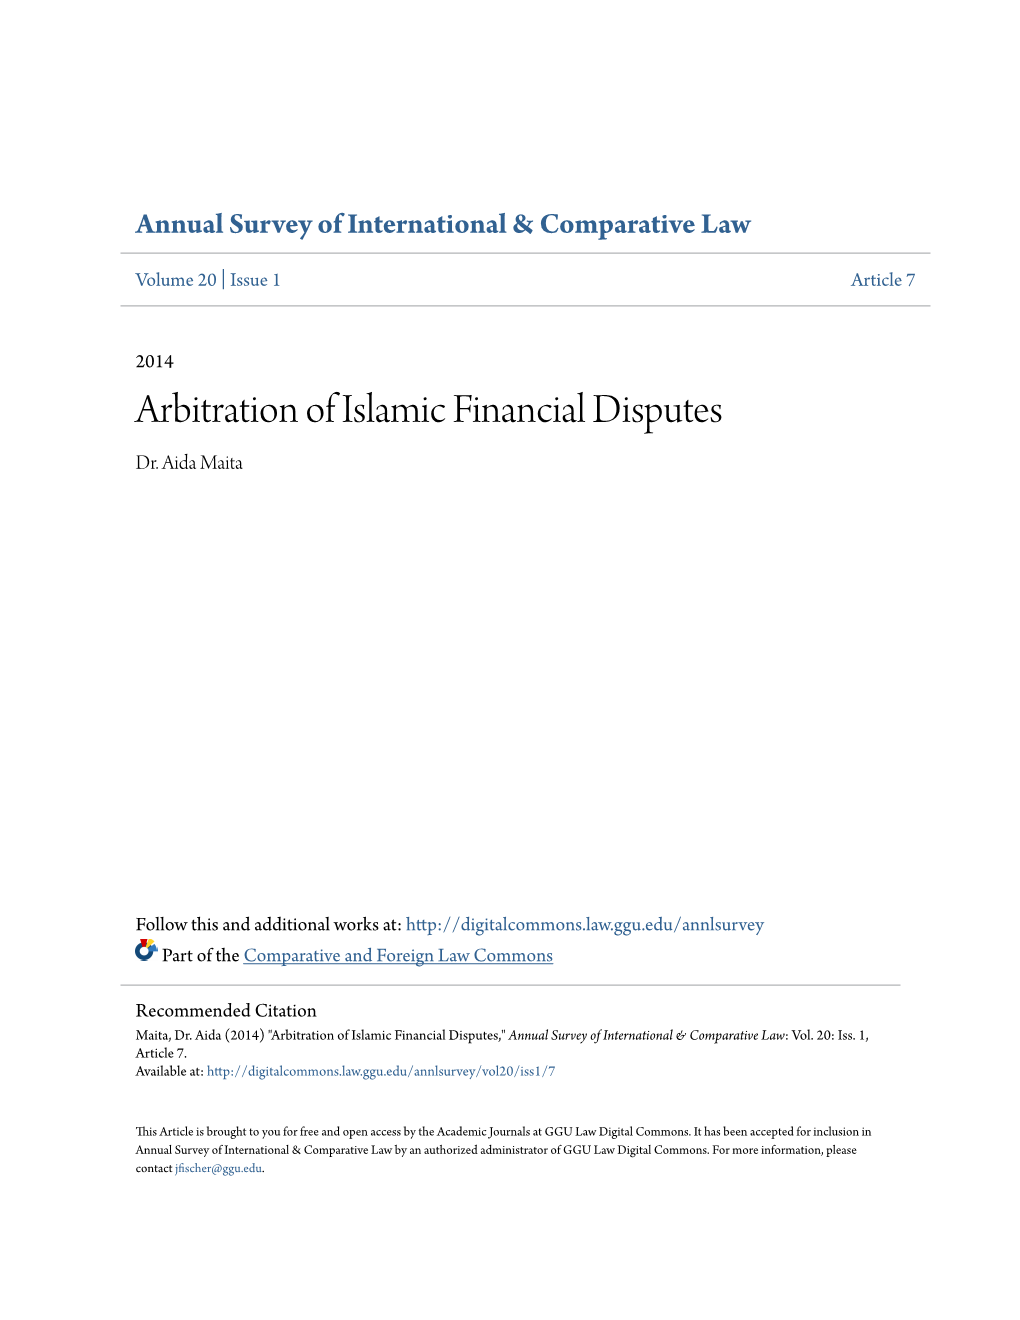 Arbitration of Islamic Financial Disputes Dr